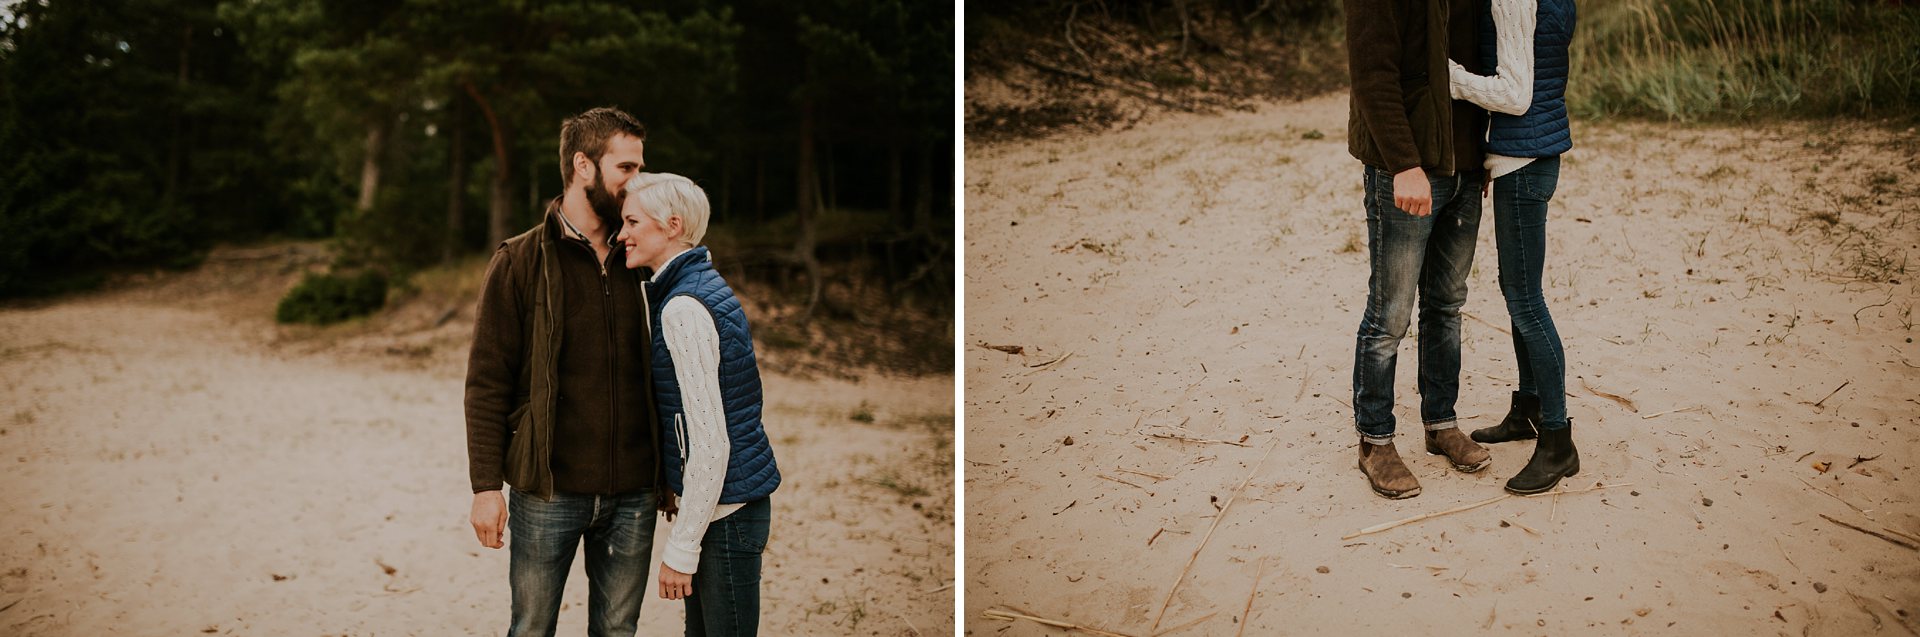 engagement photography in Vadstena Sweden